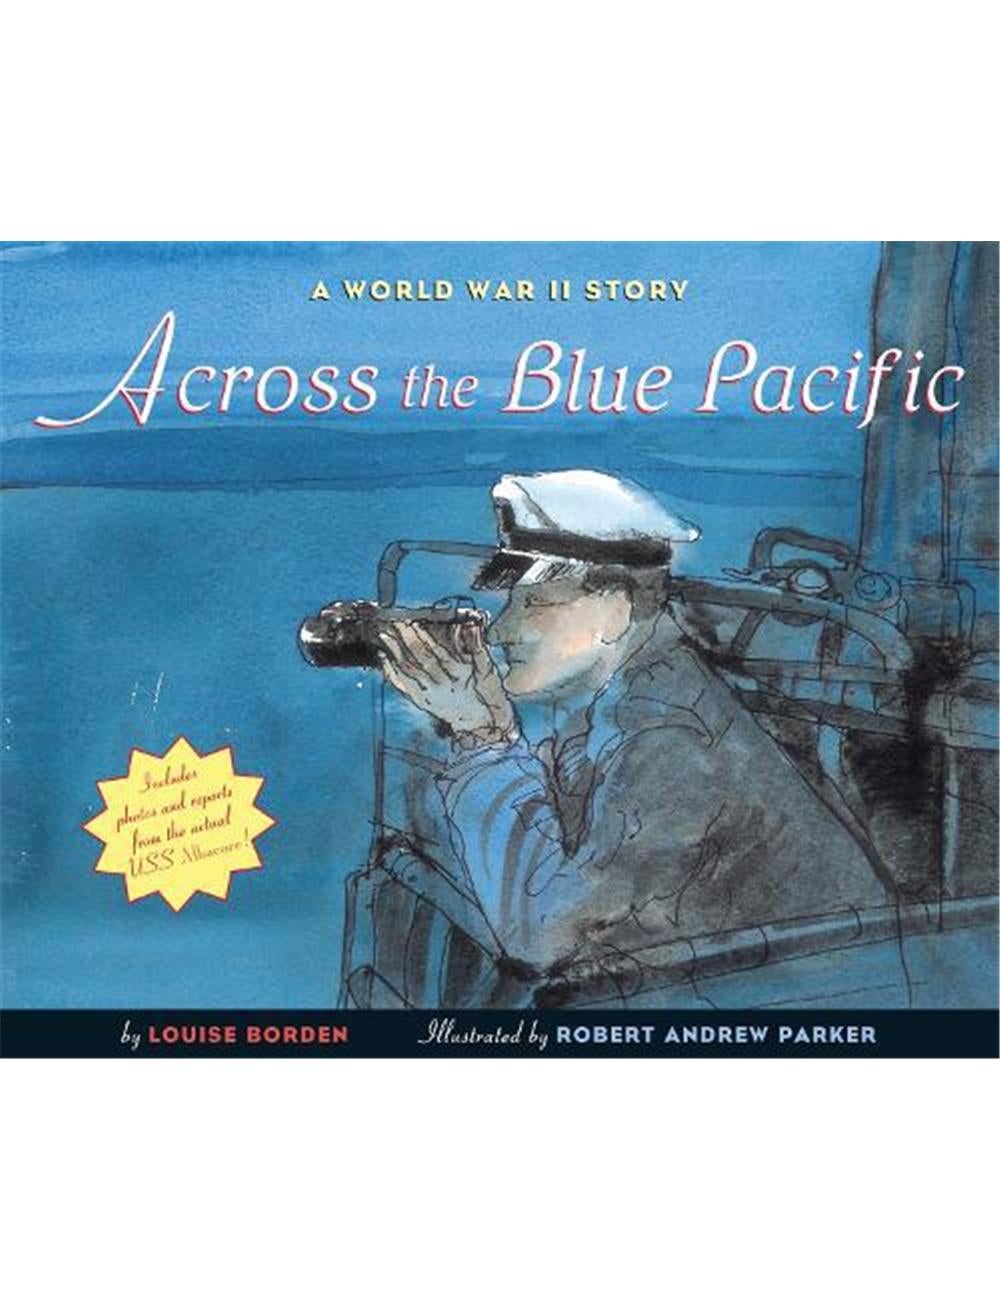 Across the Blue Pacific : A World War II Story by Louise Borden